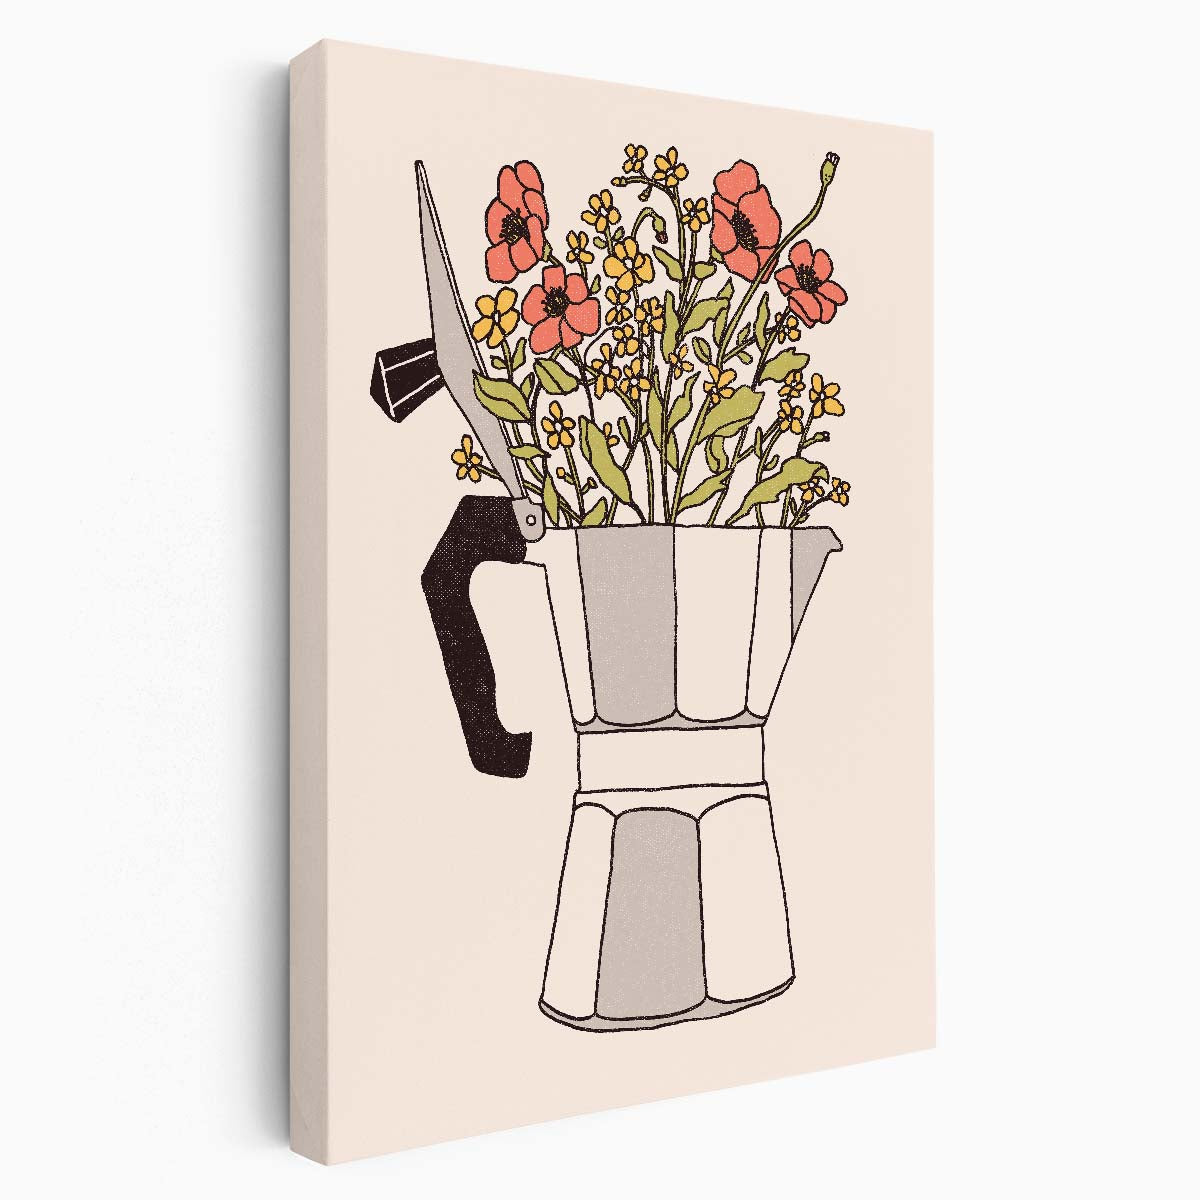 Colorful Floral Vase Illustration Wall Art by Florent Bodart by Luxuriance Designs, made in USA